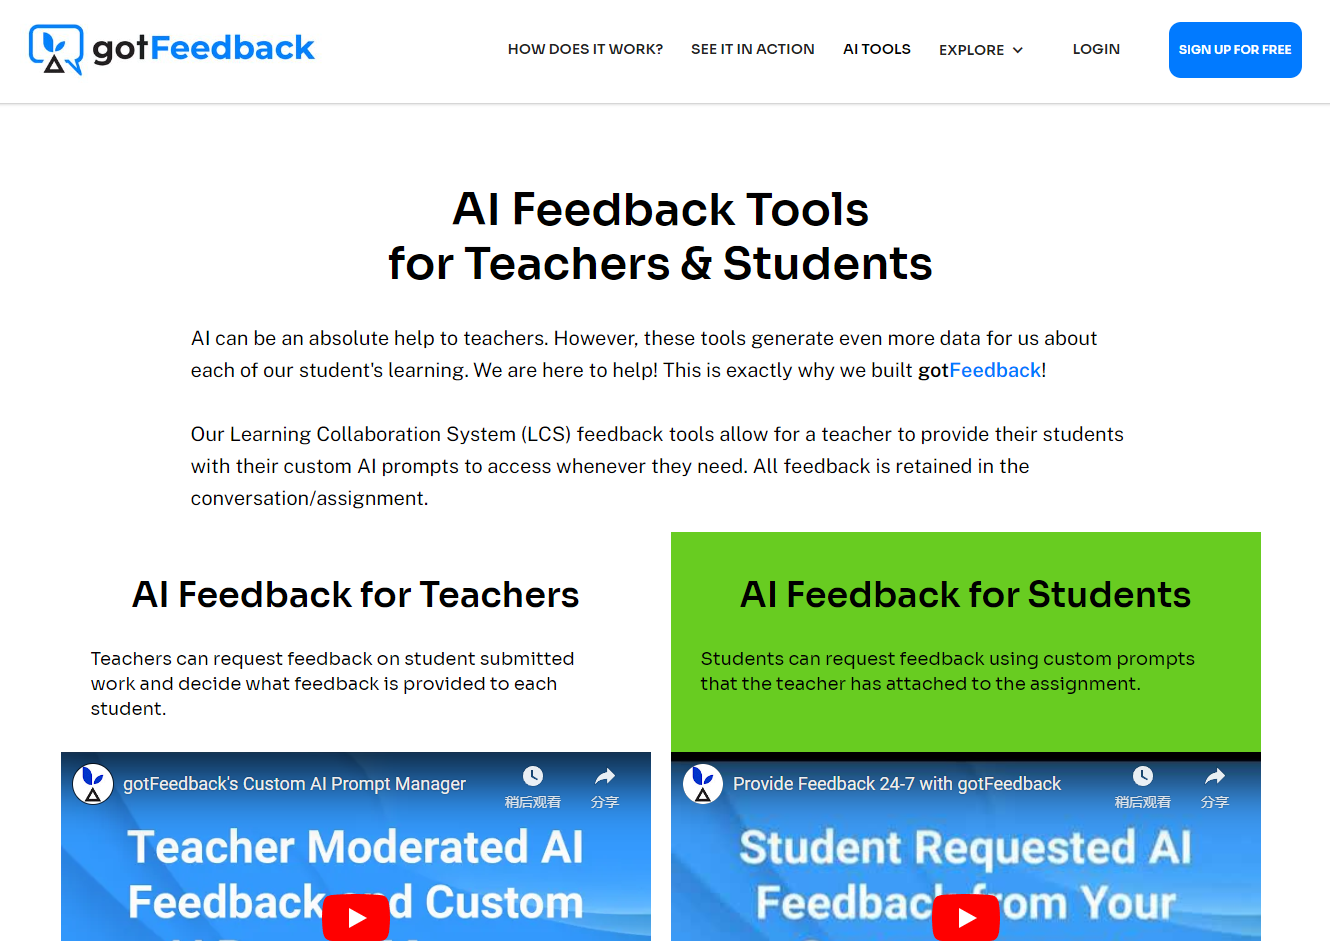 gotFeedback helps teachers provide more individualized feedback to their students in a timely way